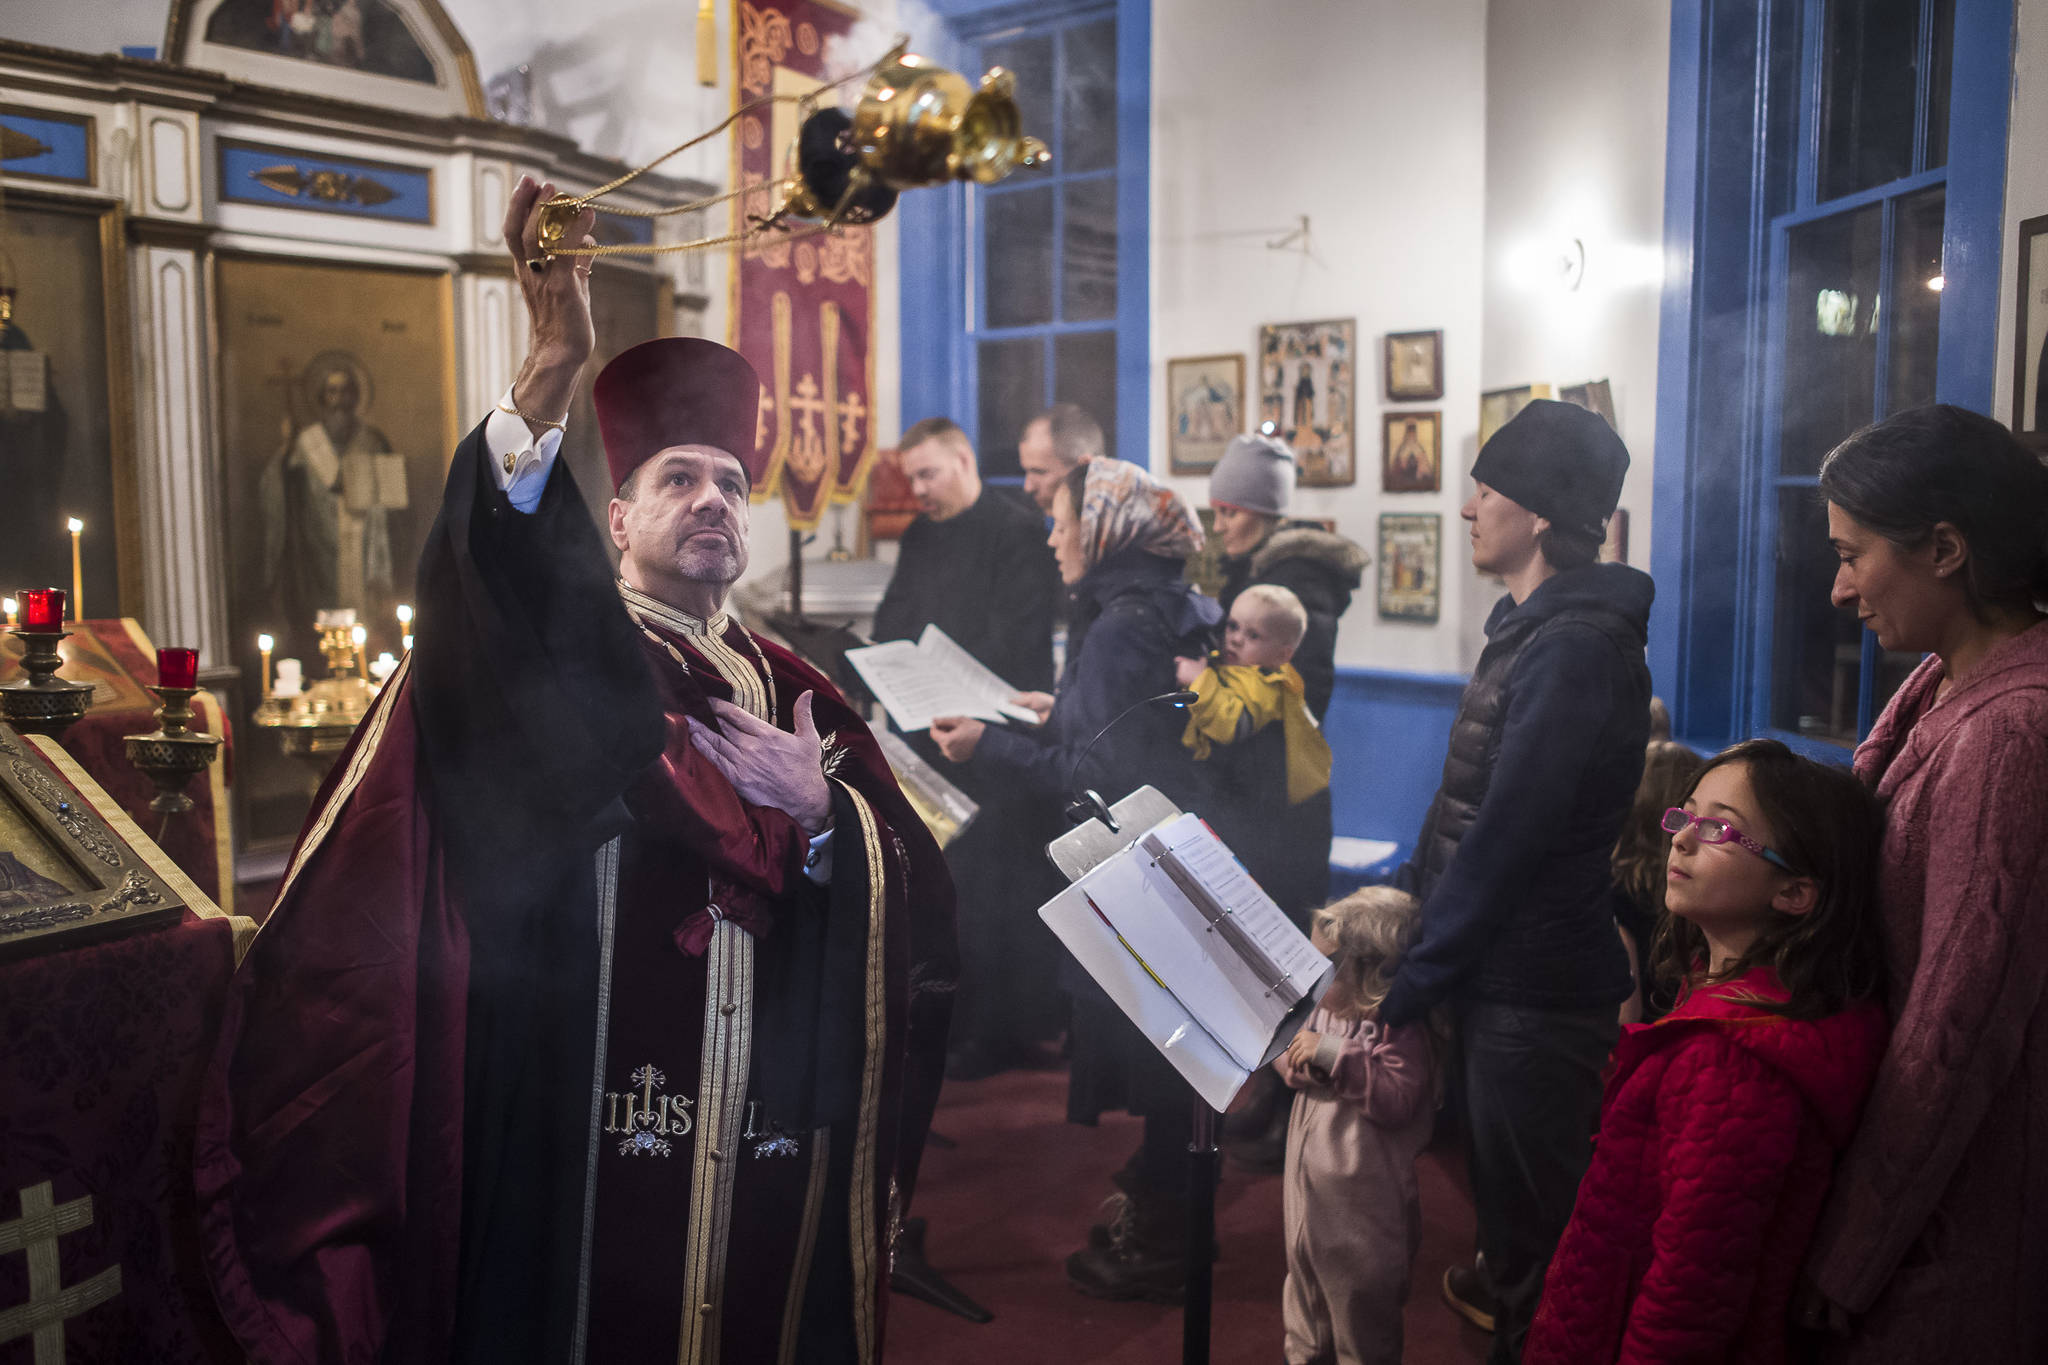 Rev. Steven F. McGuigan, Rector of the St. Nicholas Russian Orthodox Church, performs a Festal Vespers service to celebrate on the eve of Saint Nicholas Day on Wednesday, Dec. 5, 2018. The Cathedral of the Nativity of the Blessed Virgin Mary hosted a recepton for the congregation in St. Ann’s Parish Hall after the service. (Michael Penn | Juneau Empire)